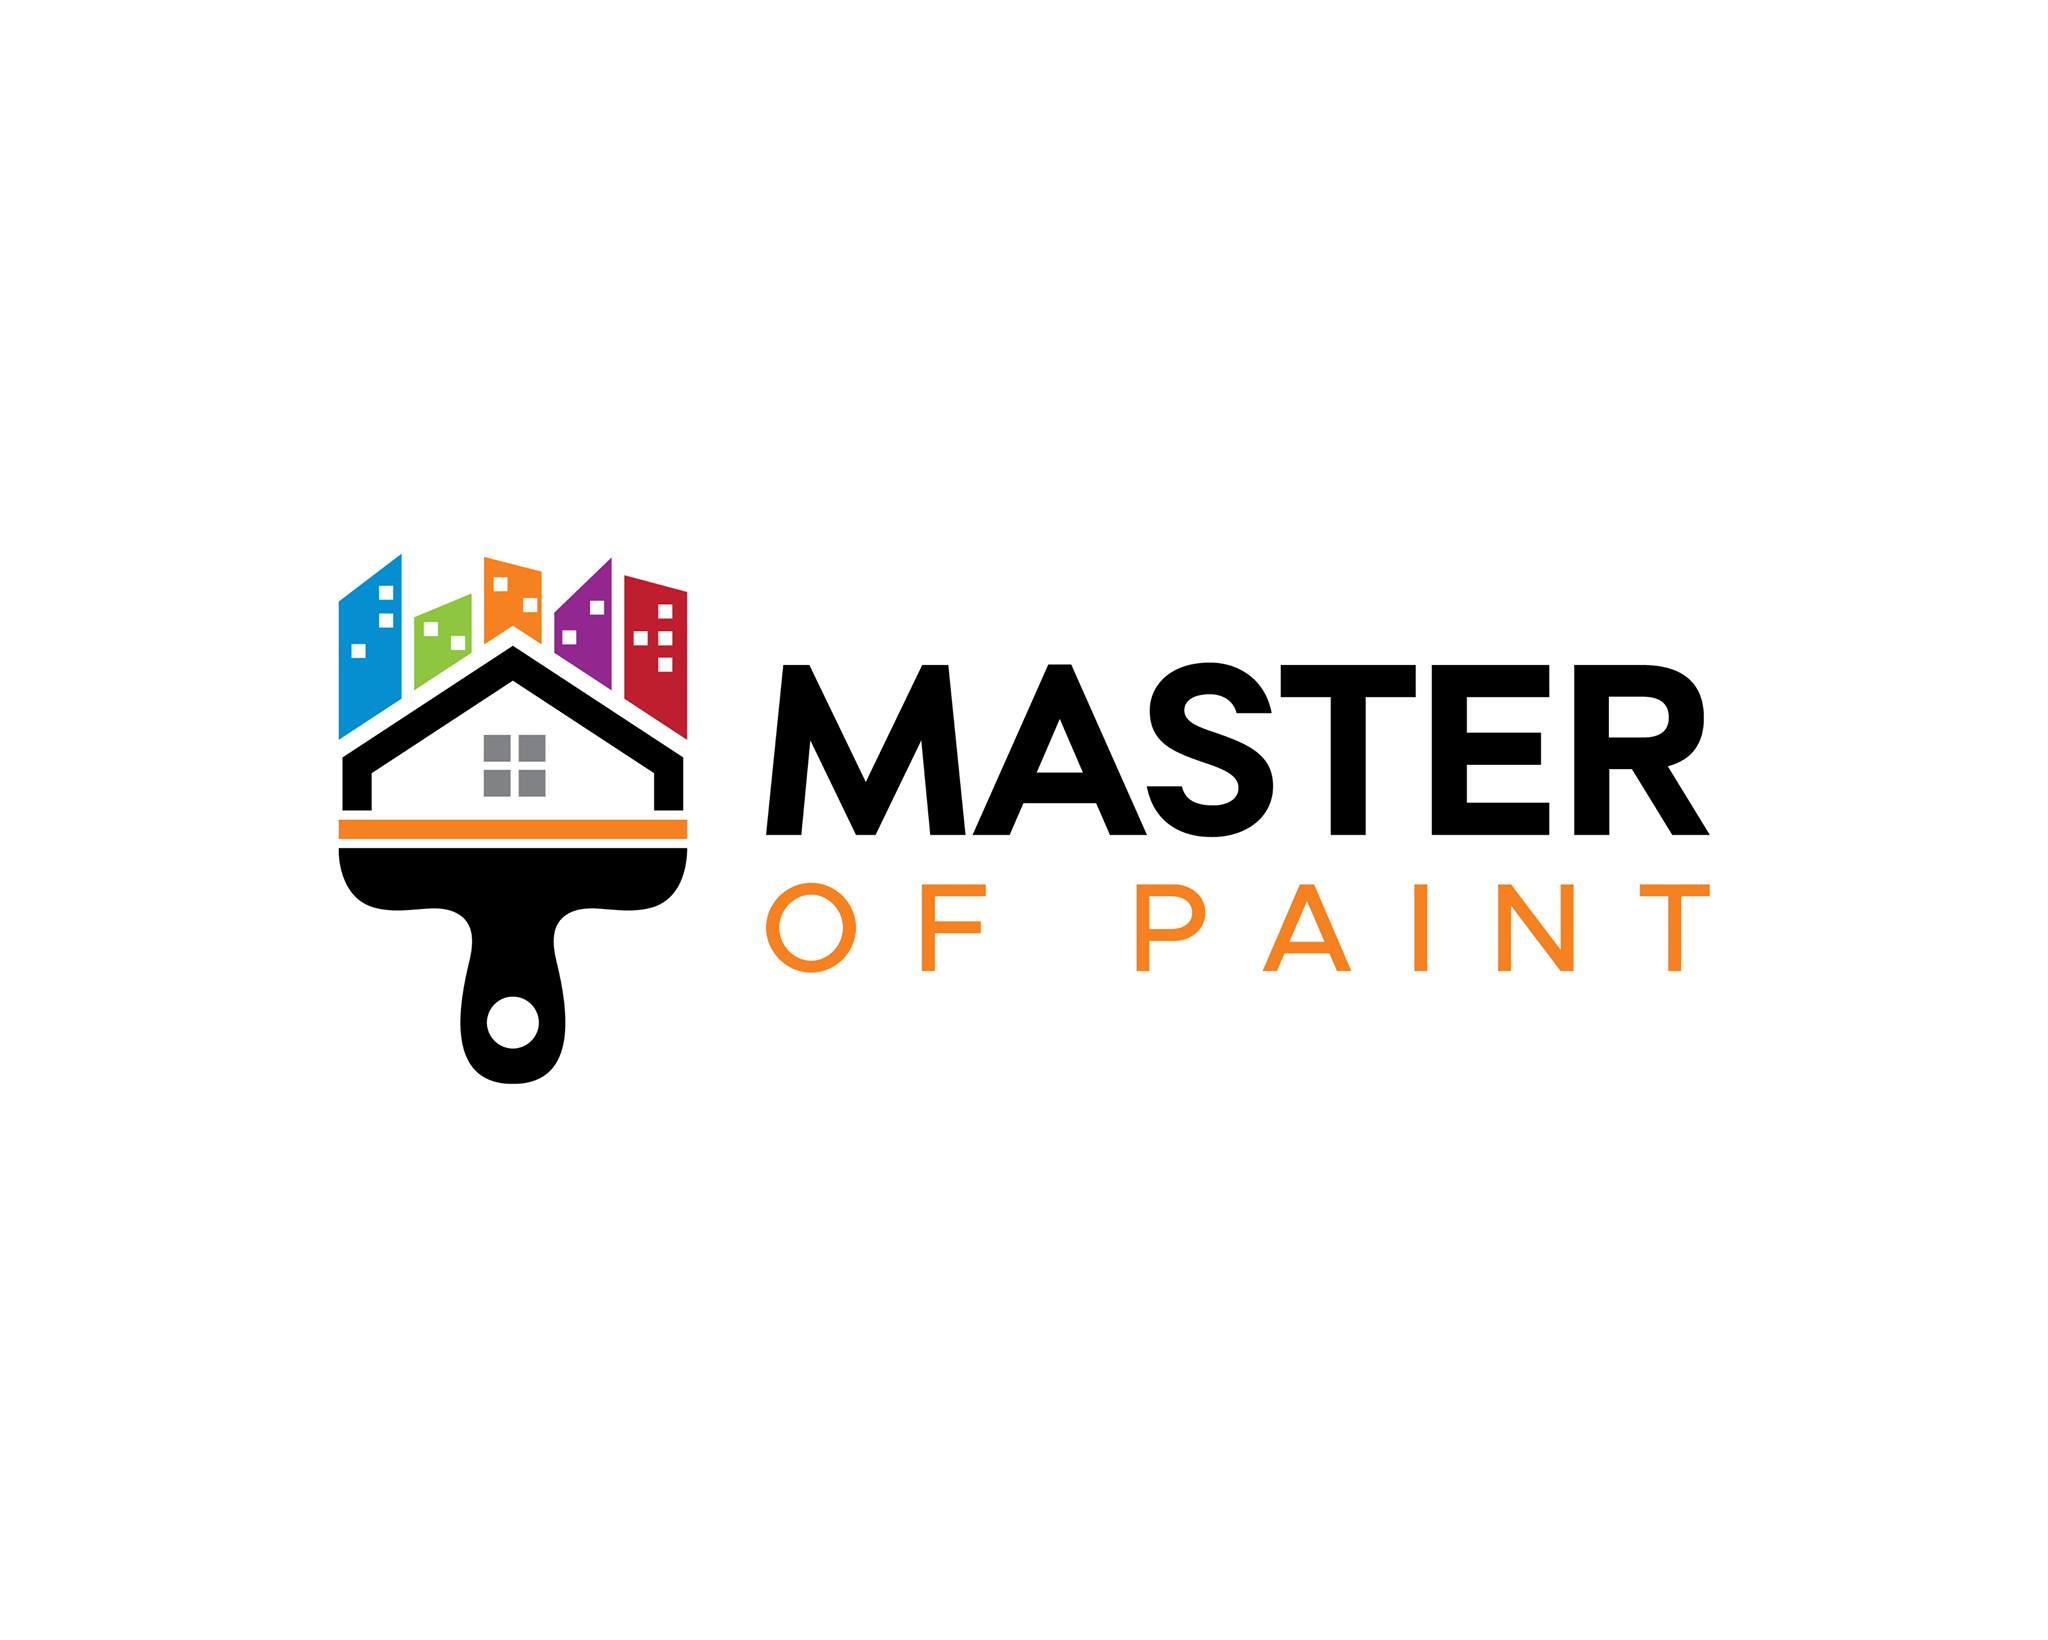 Master of Paint